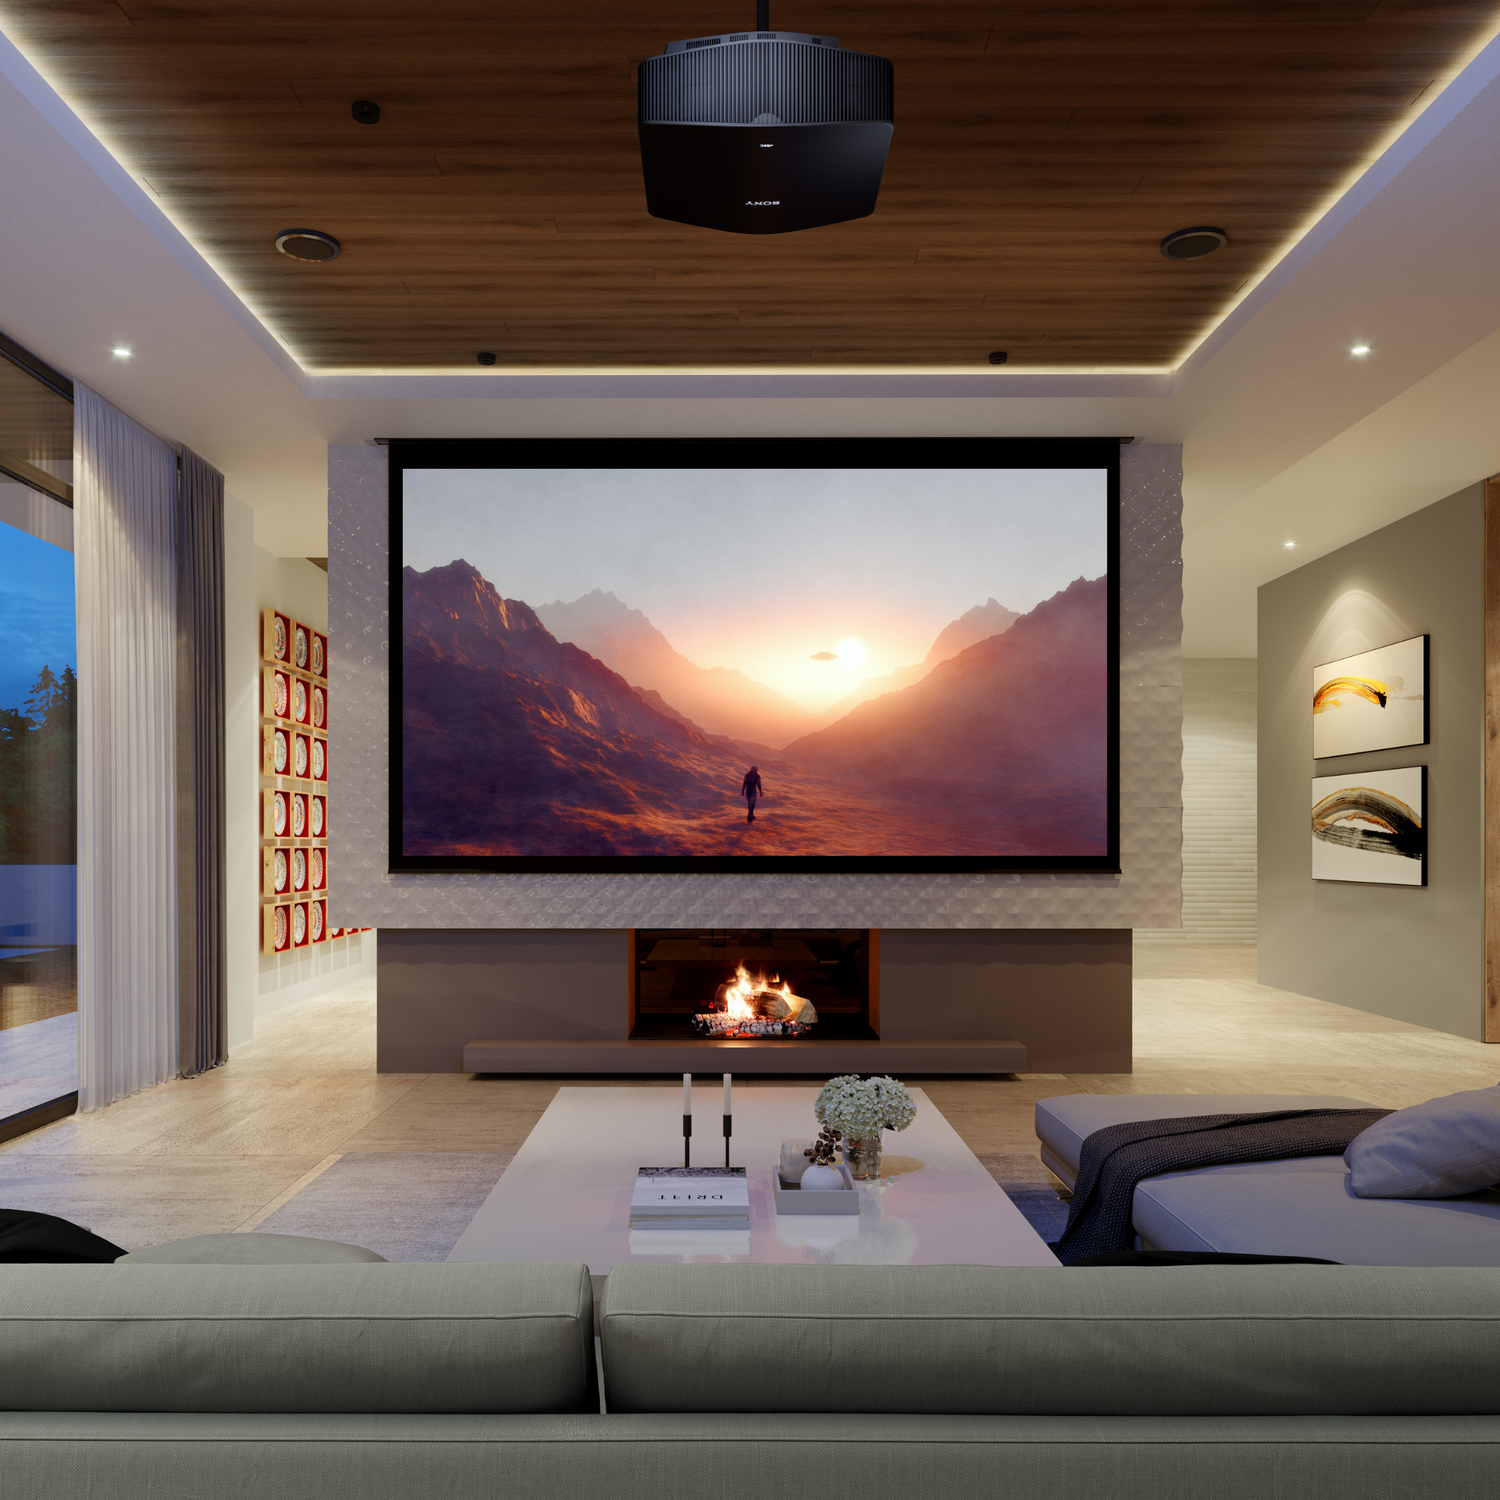 How To Set Up Your Sony Projector for Your Home?